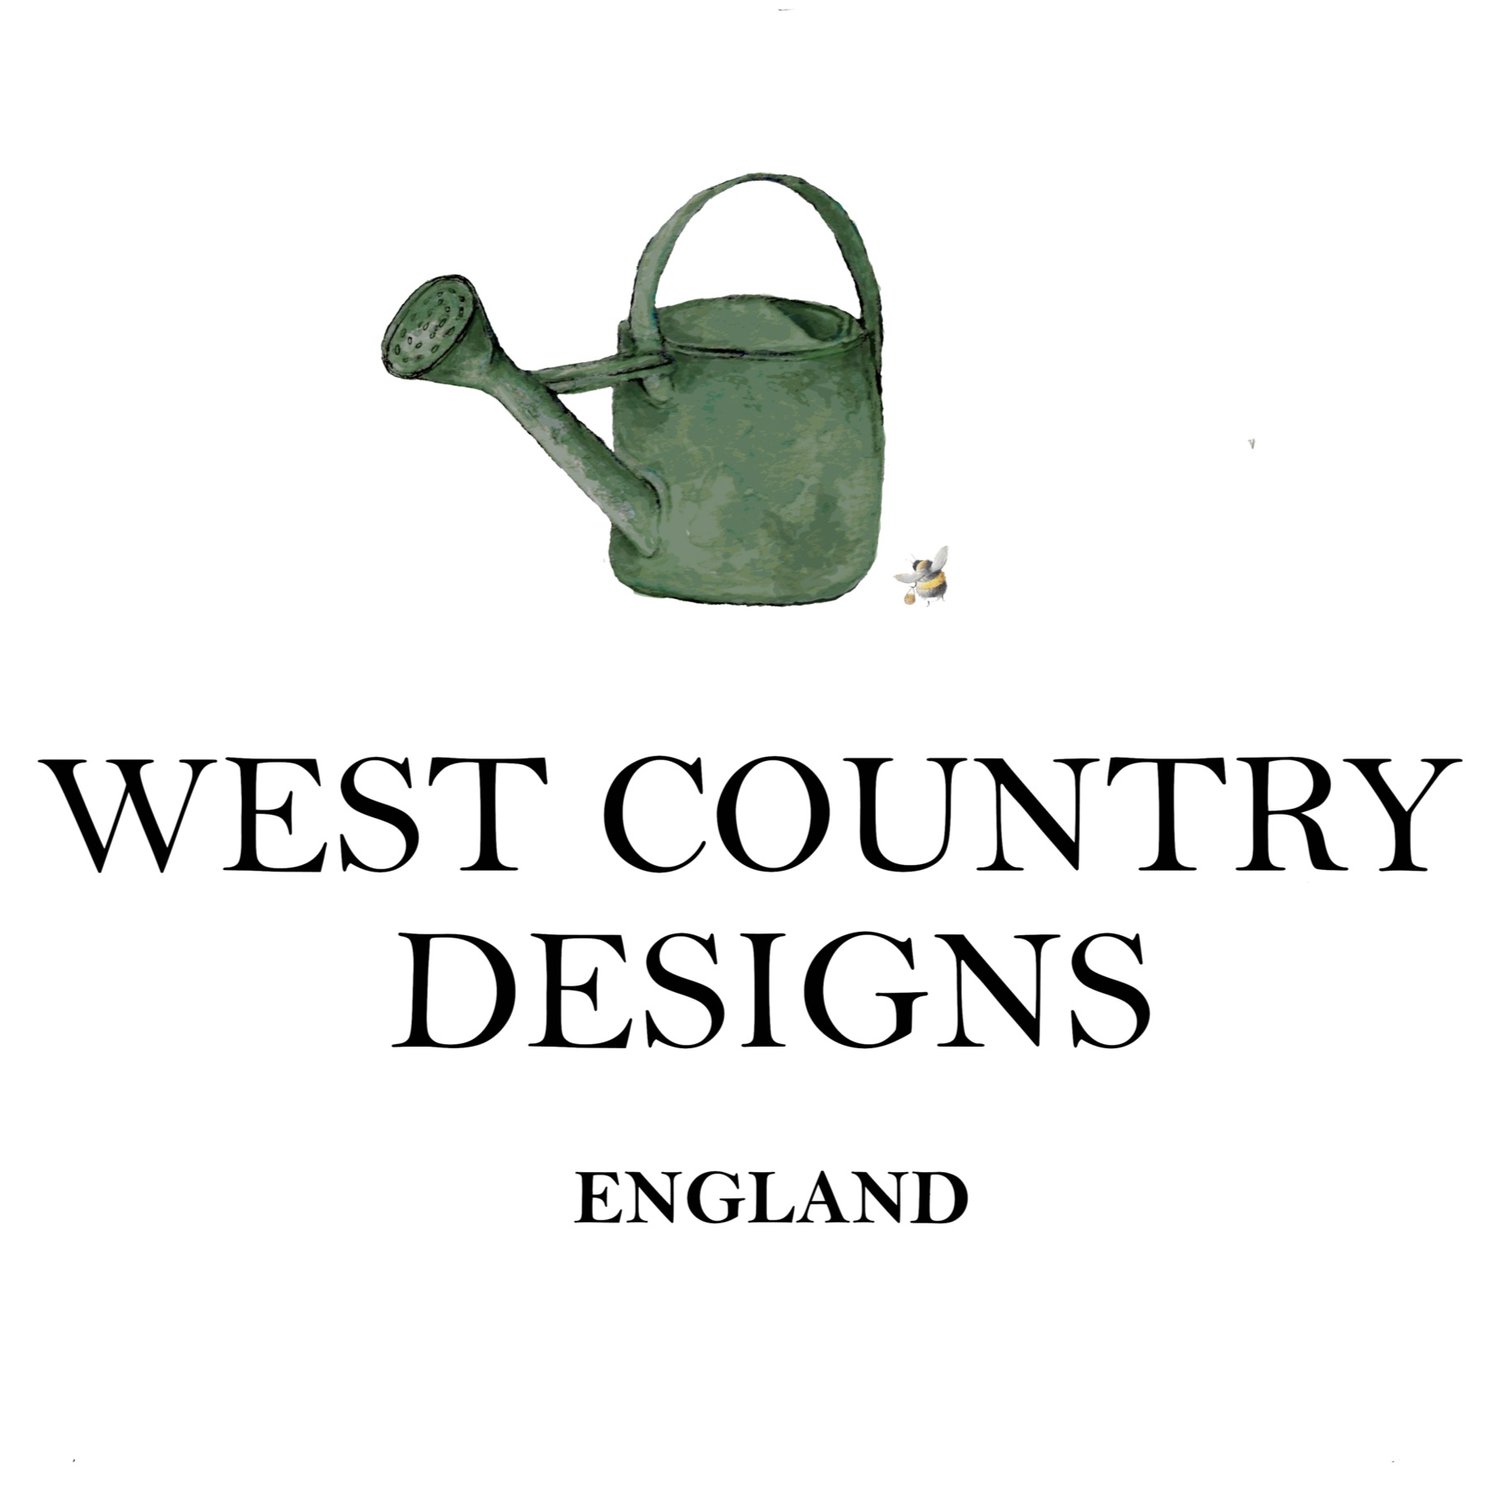     West Country Designs